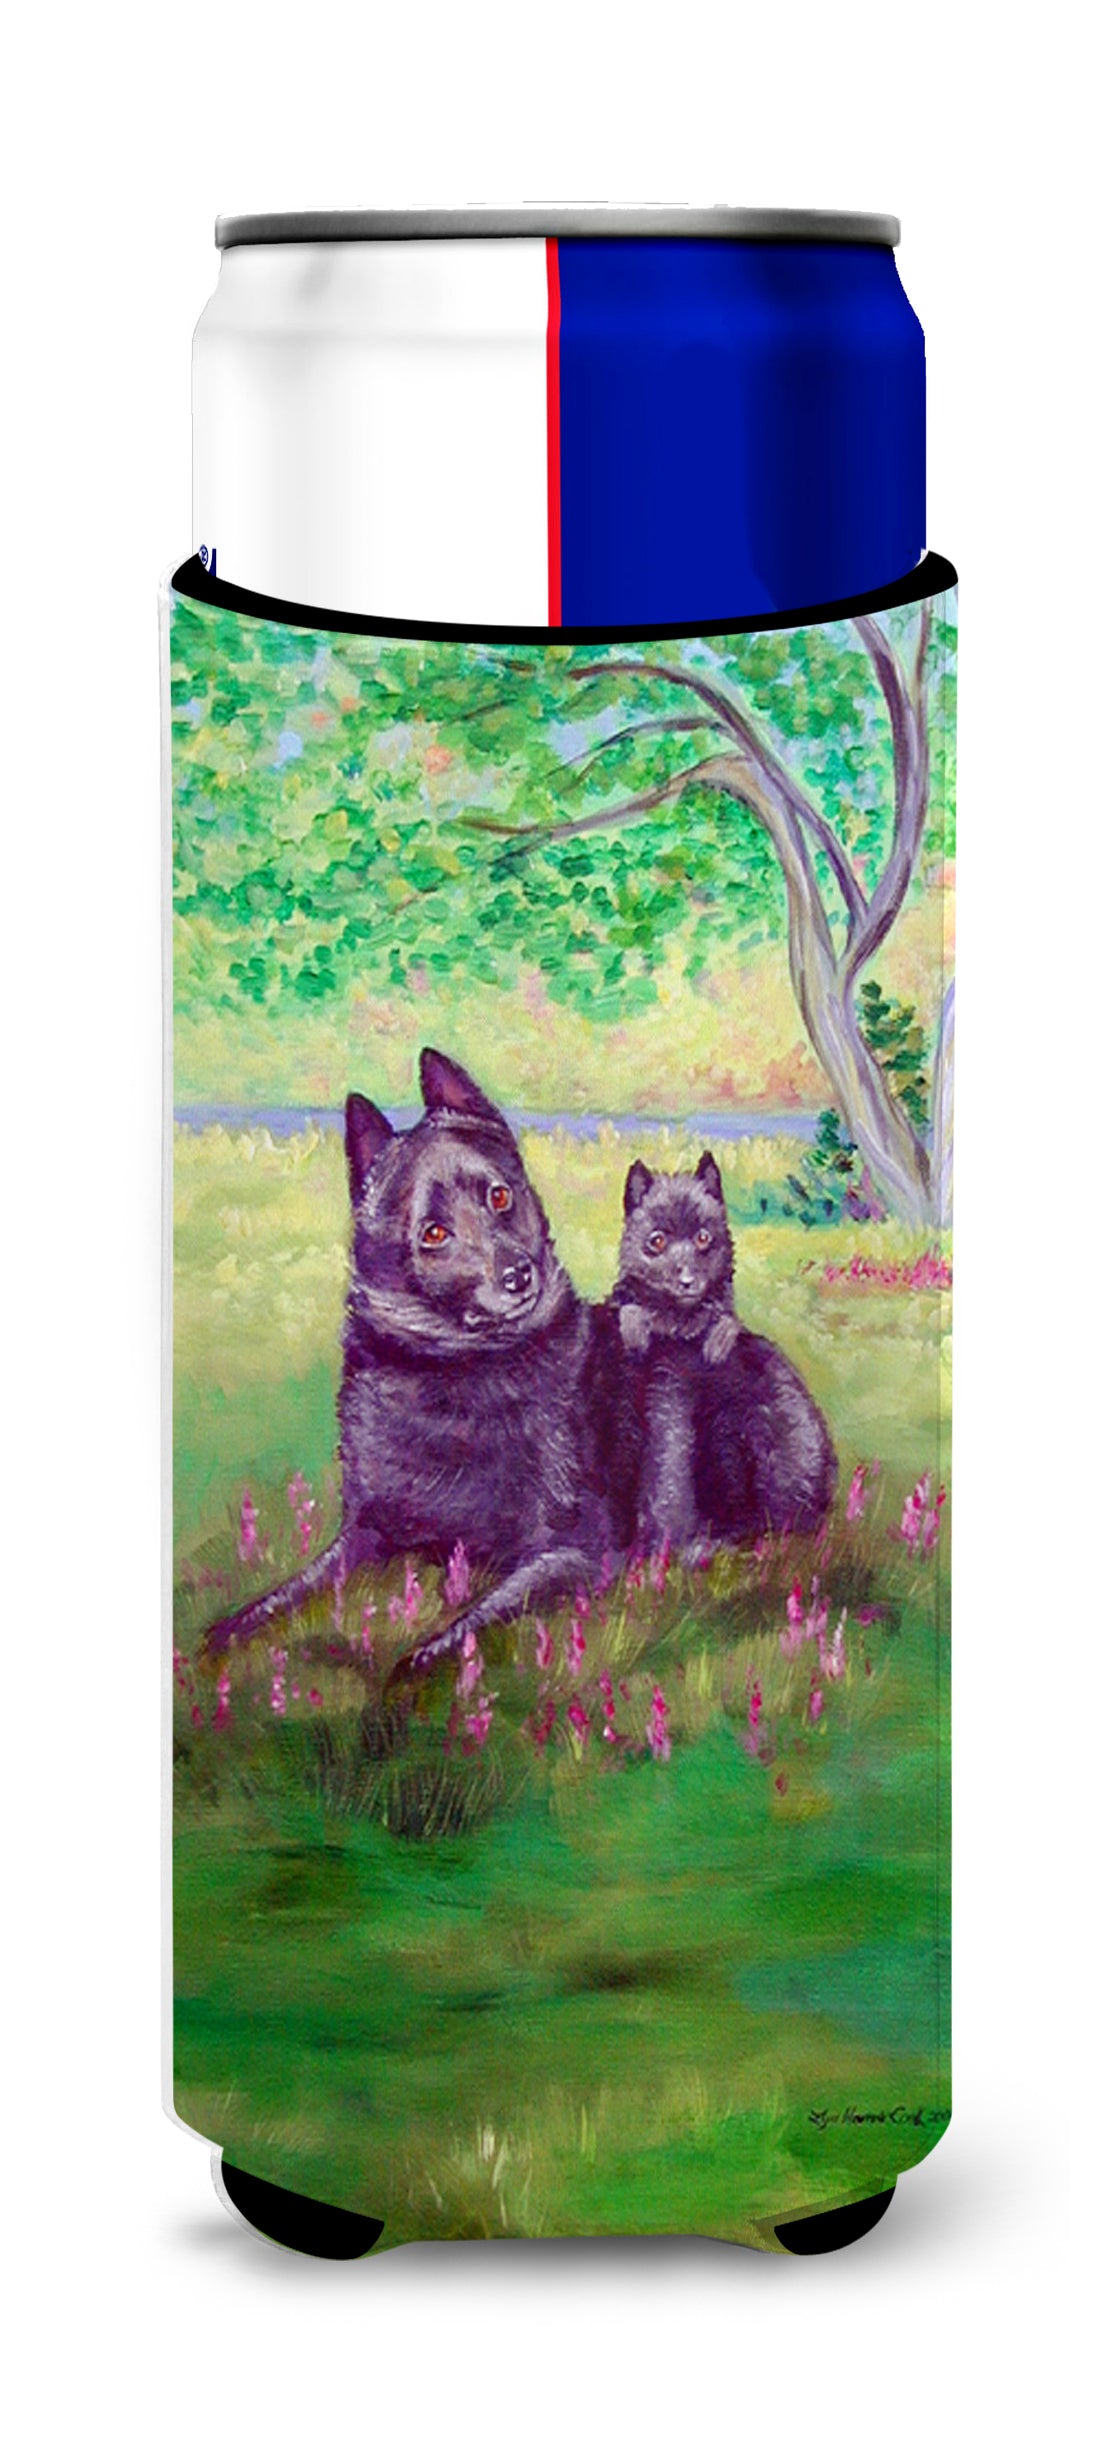 Schipperke and puppy Ultra Beverage Insulators for slim cans 7263MUK.